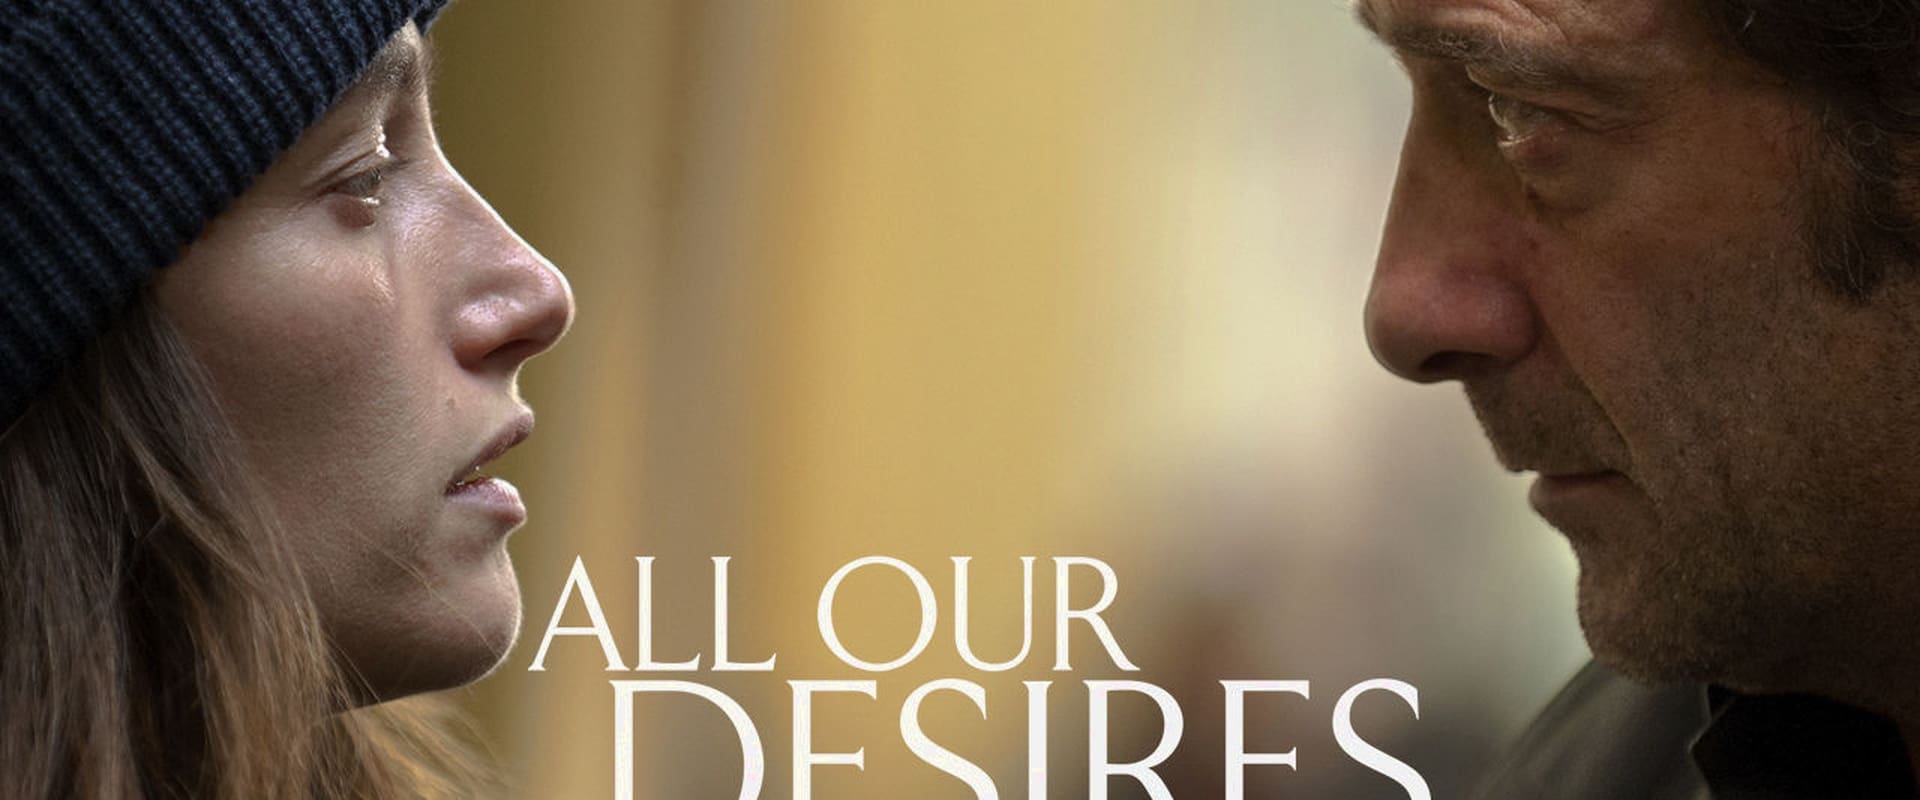 All Our Desires